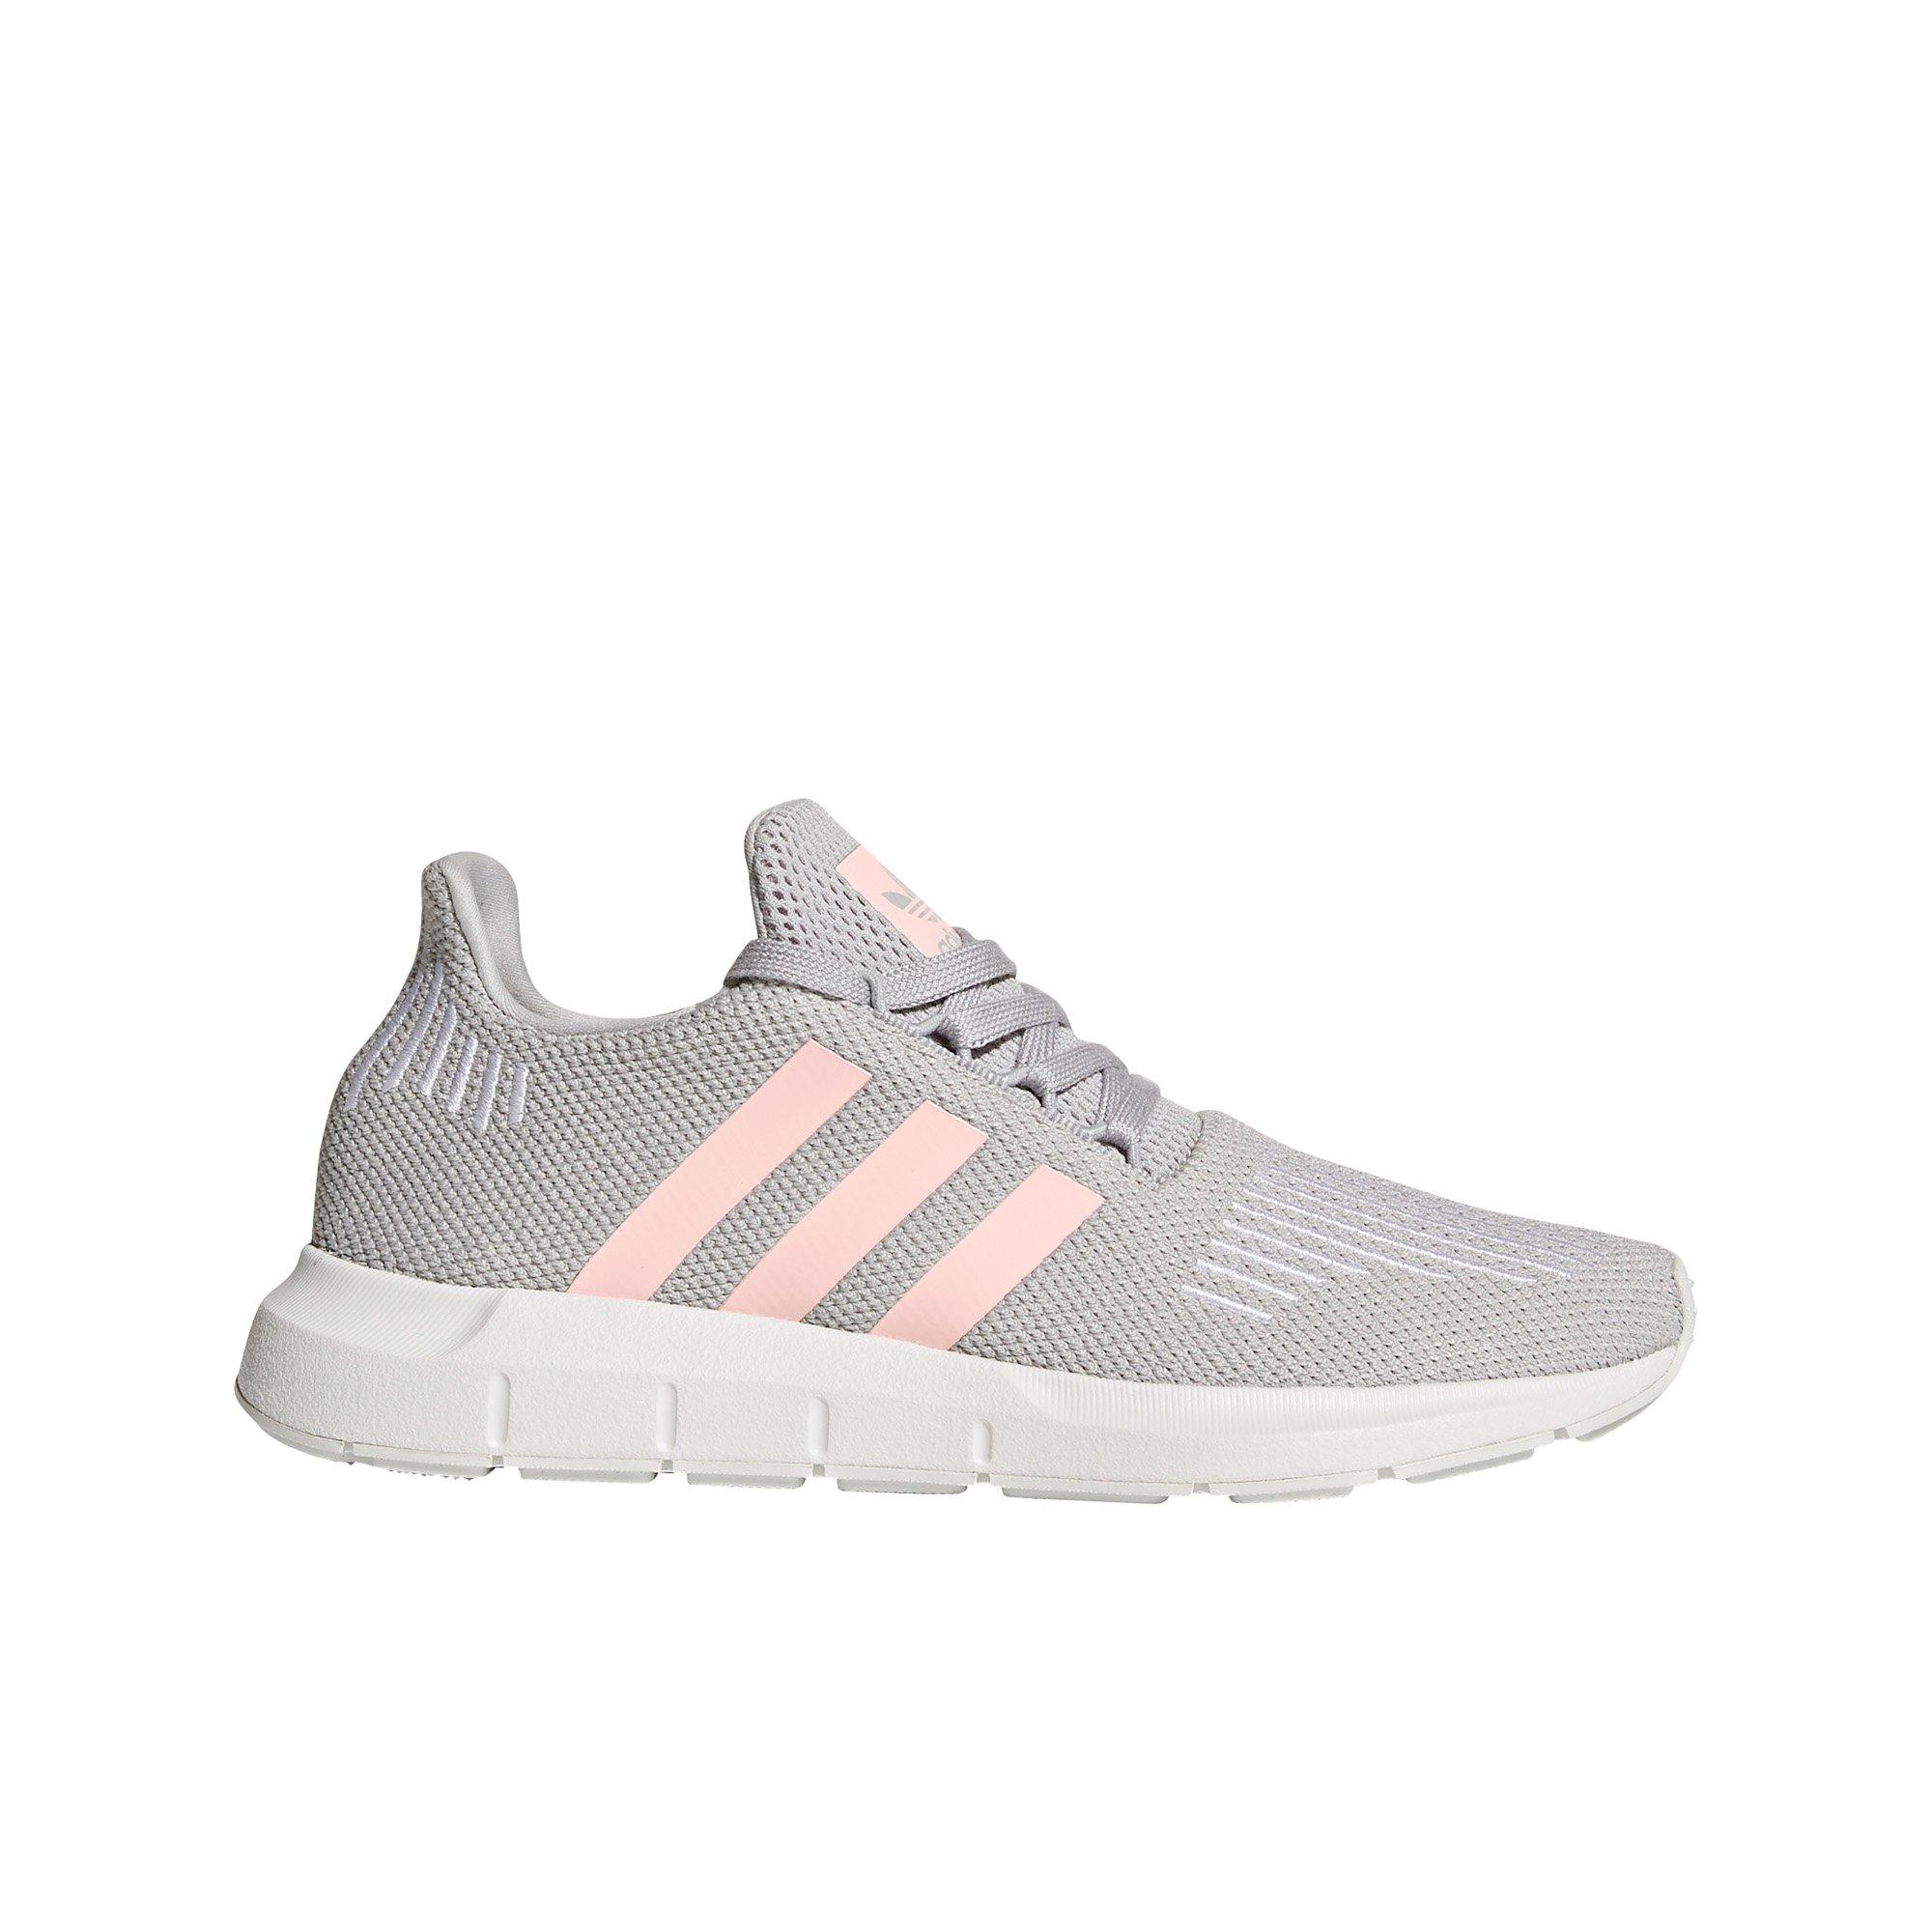 adidas swift run shoes icey pink